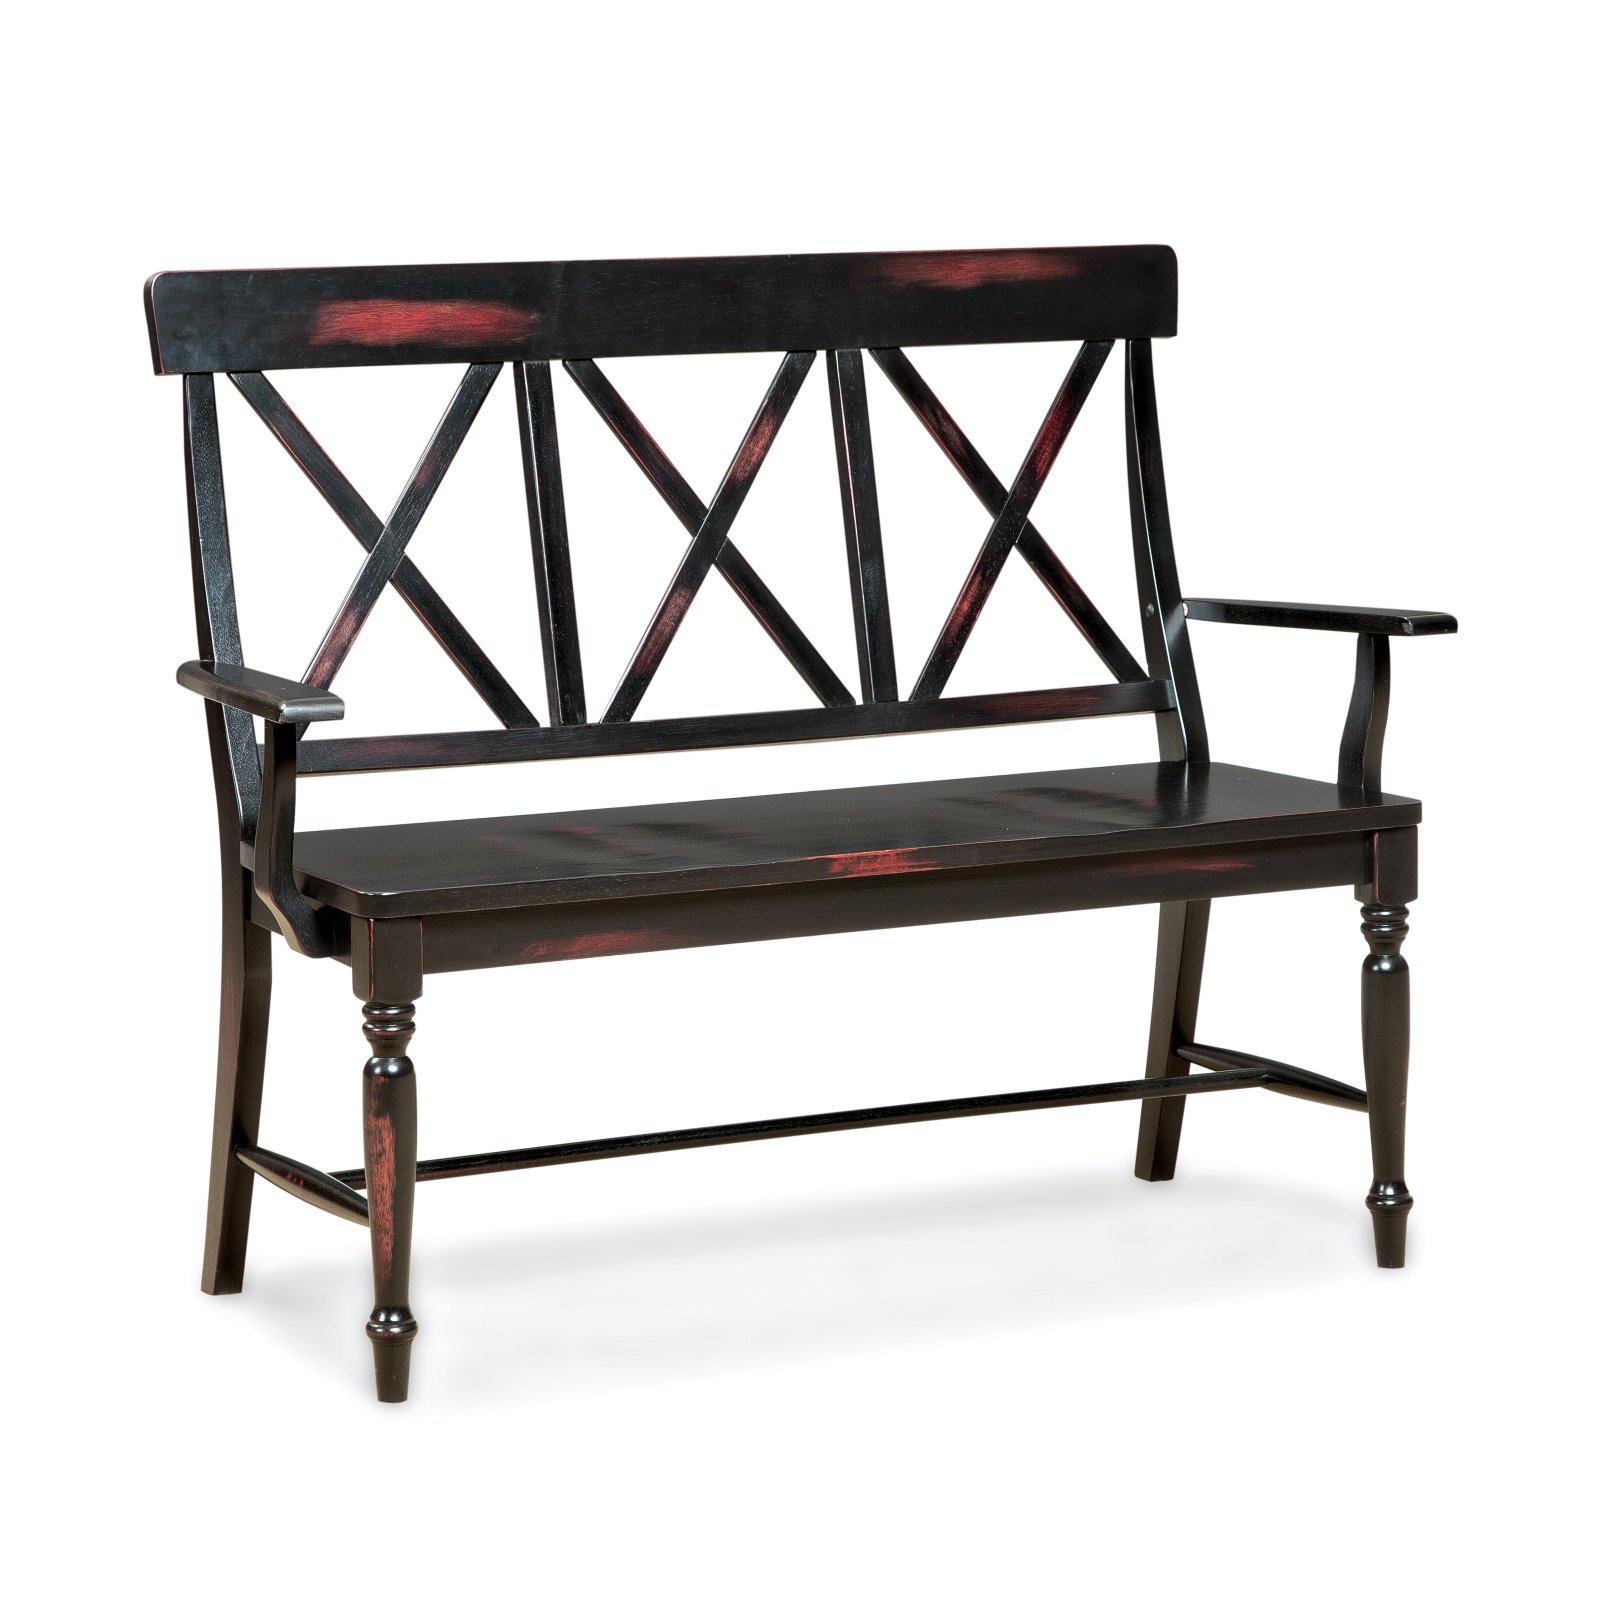 Intercon Imagio Home Roanoke X-Back Dining Bench, Rubbed Black - image 1 of 1